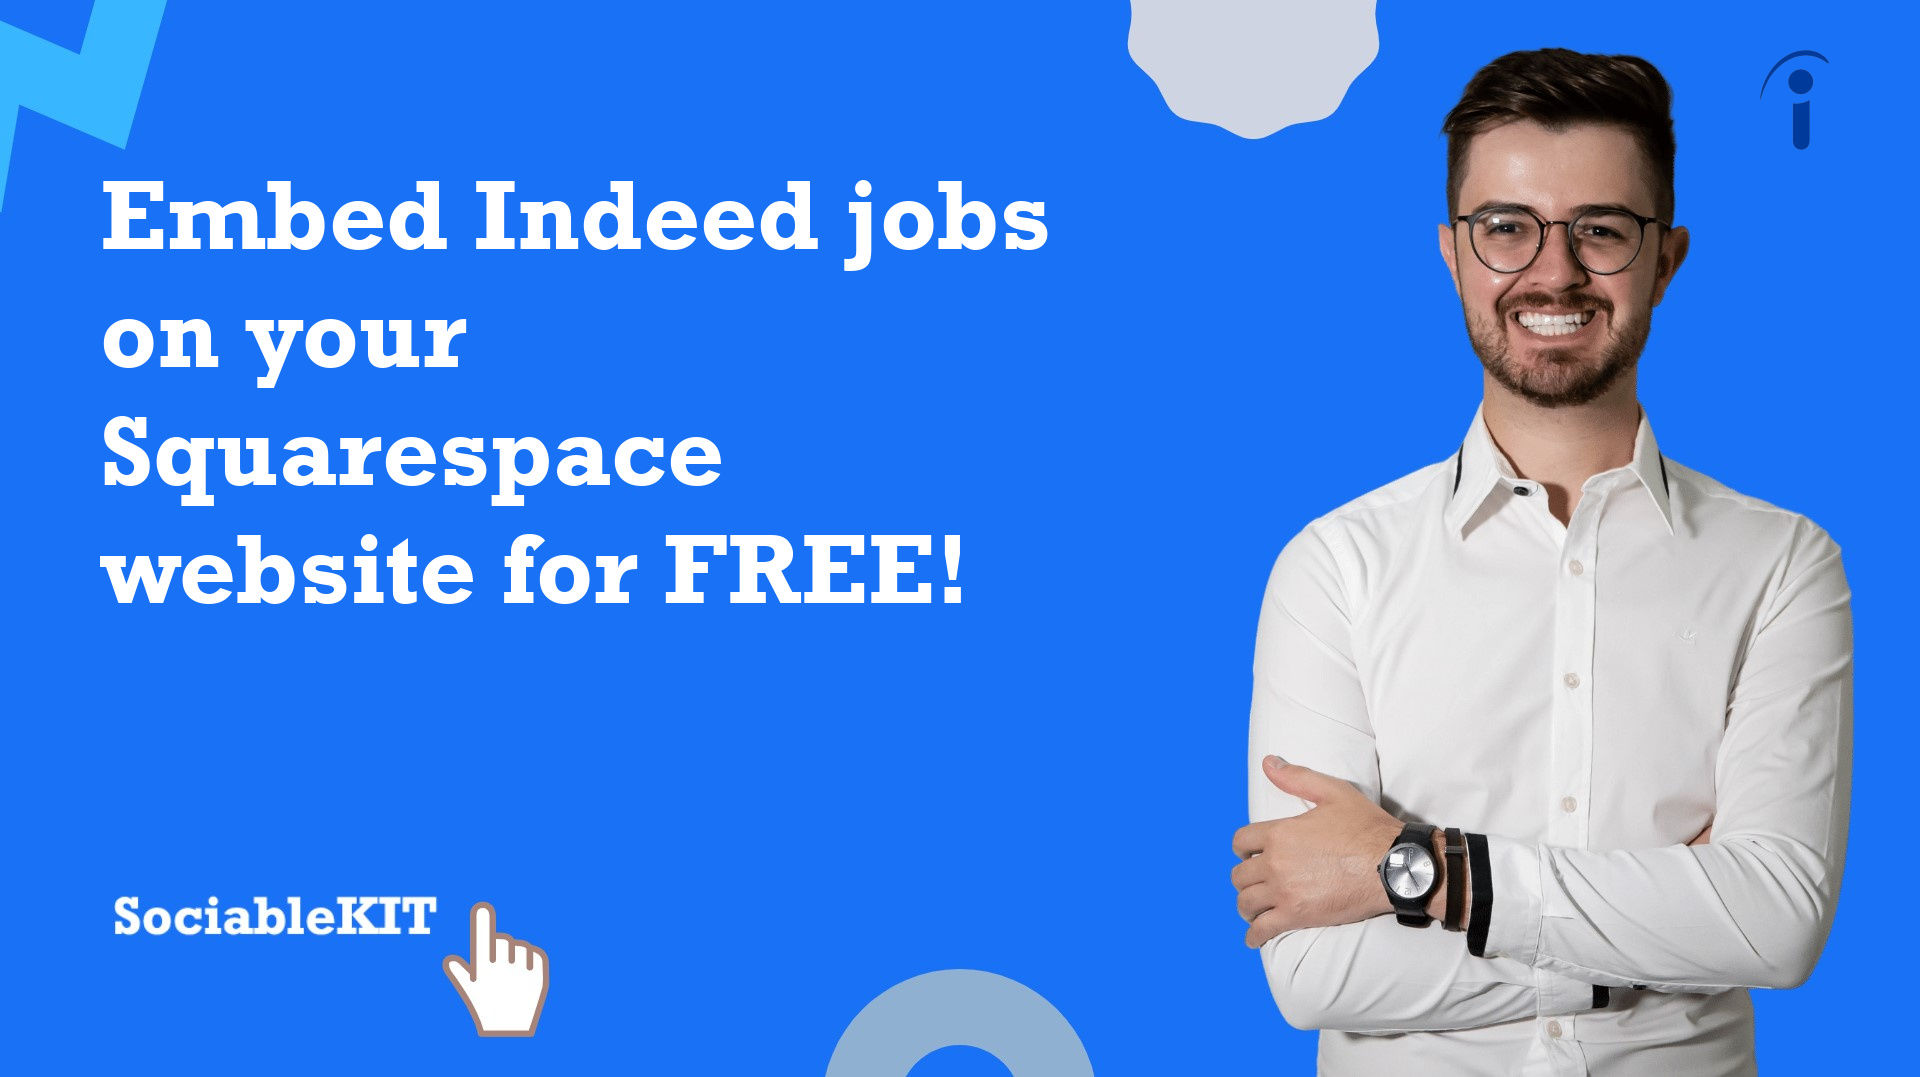 How to embed Indeed jobs on your Squarespace website for FREE?